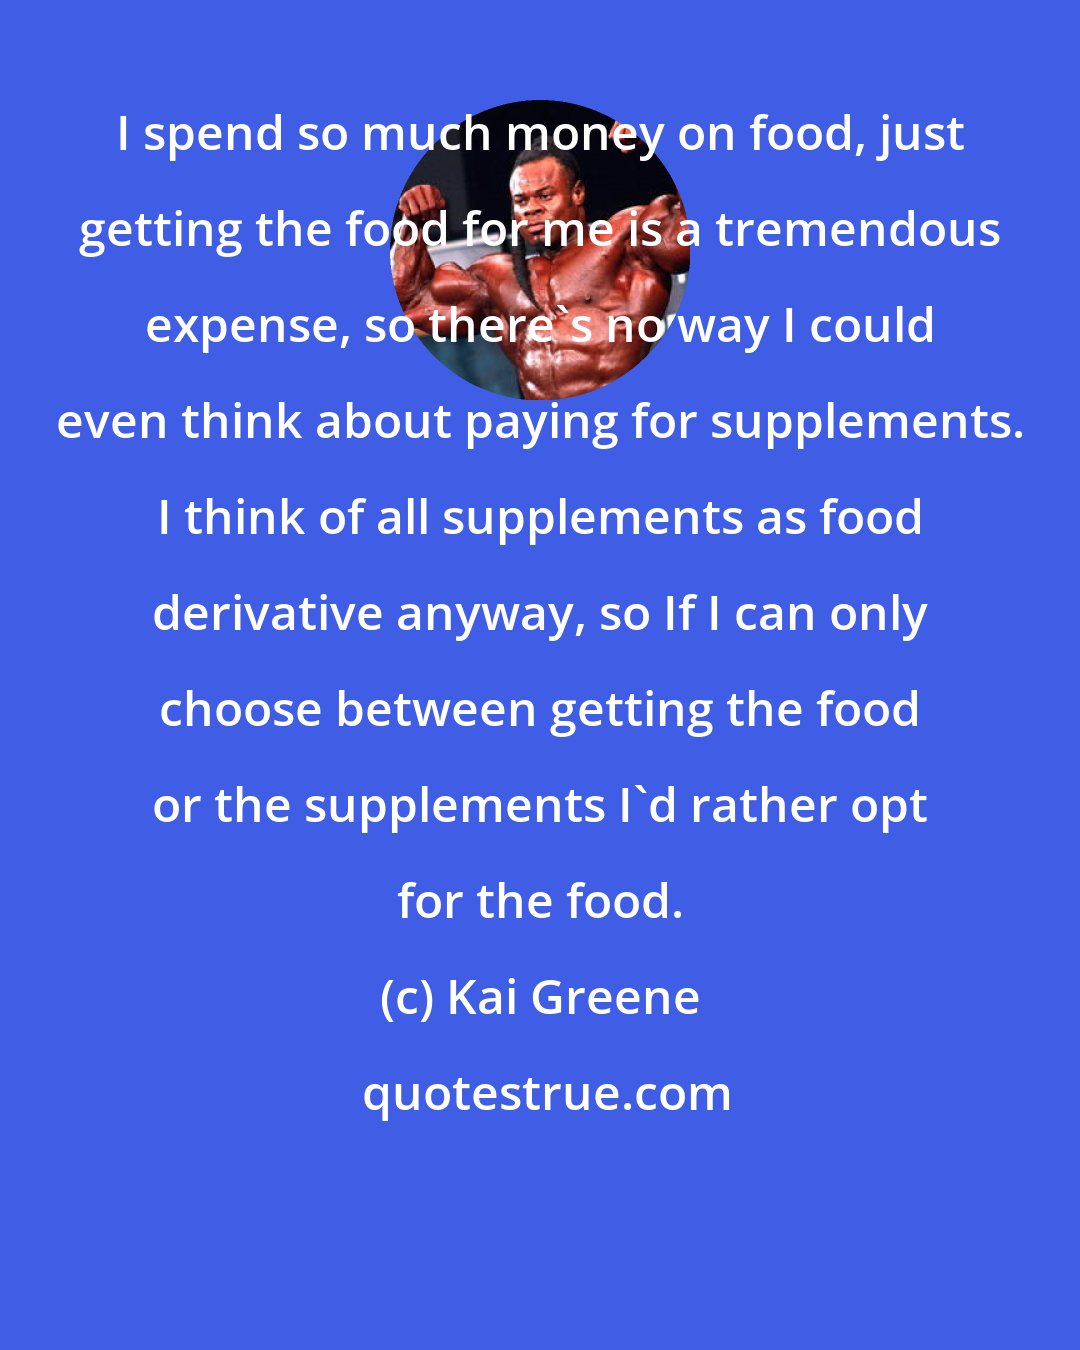 Kai Greene: I spend so much money on food, just getting the food for me is a tremendous expense, so there's no way I could even think about paying for supplements. I think of all supplements as food derivative anyway, so If I can only choose between getting the food or the supplements I'd rather opt for the food.